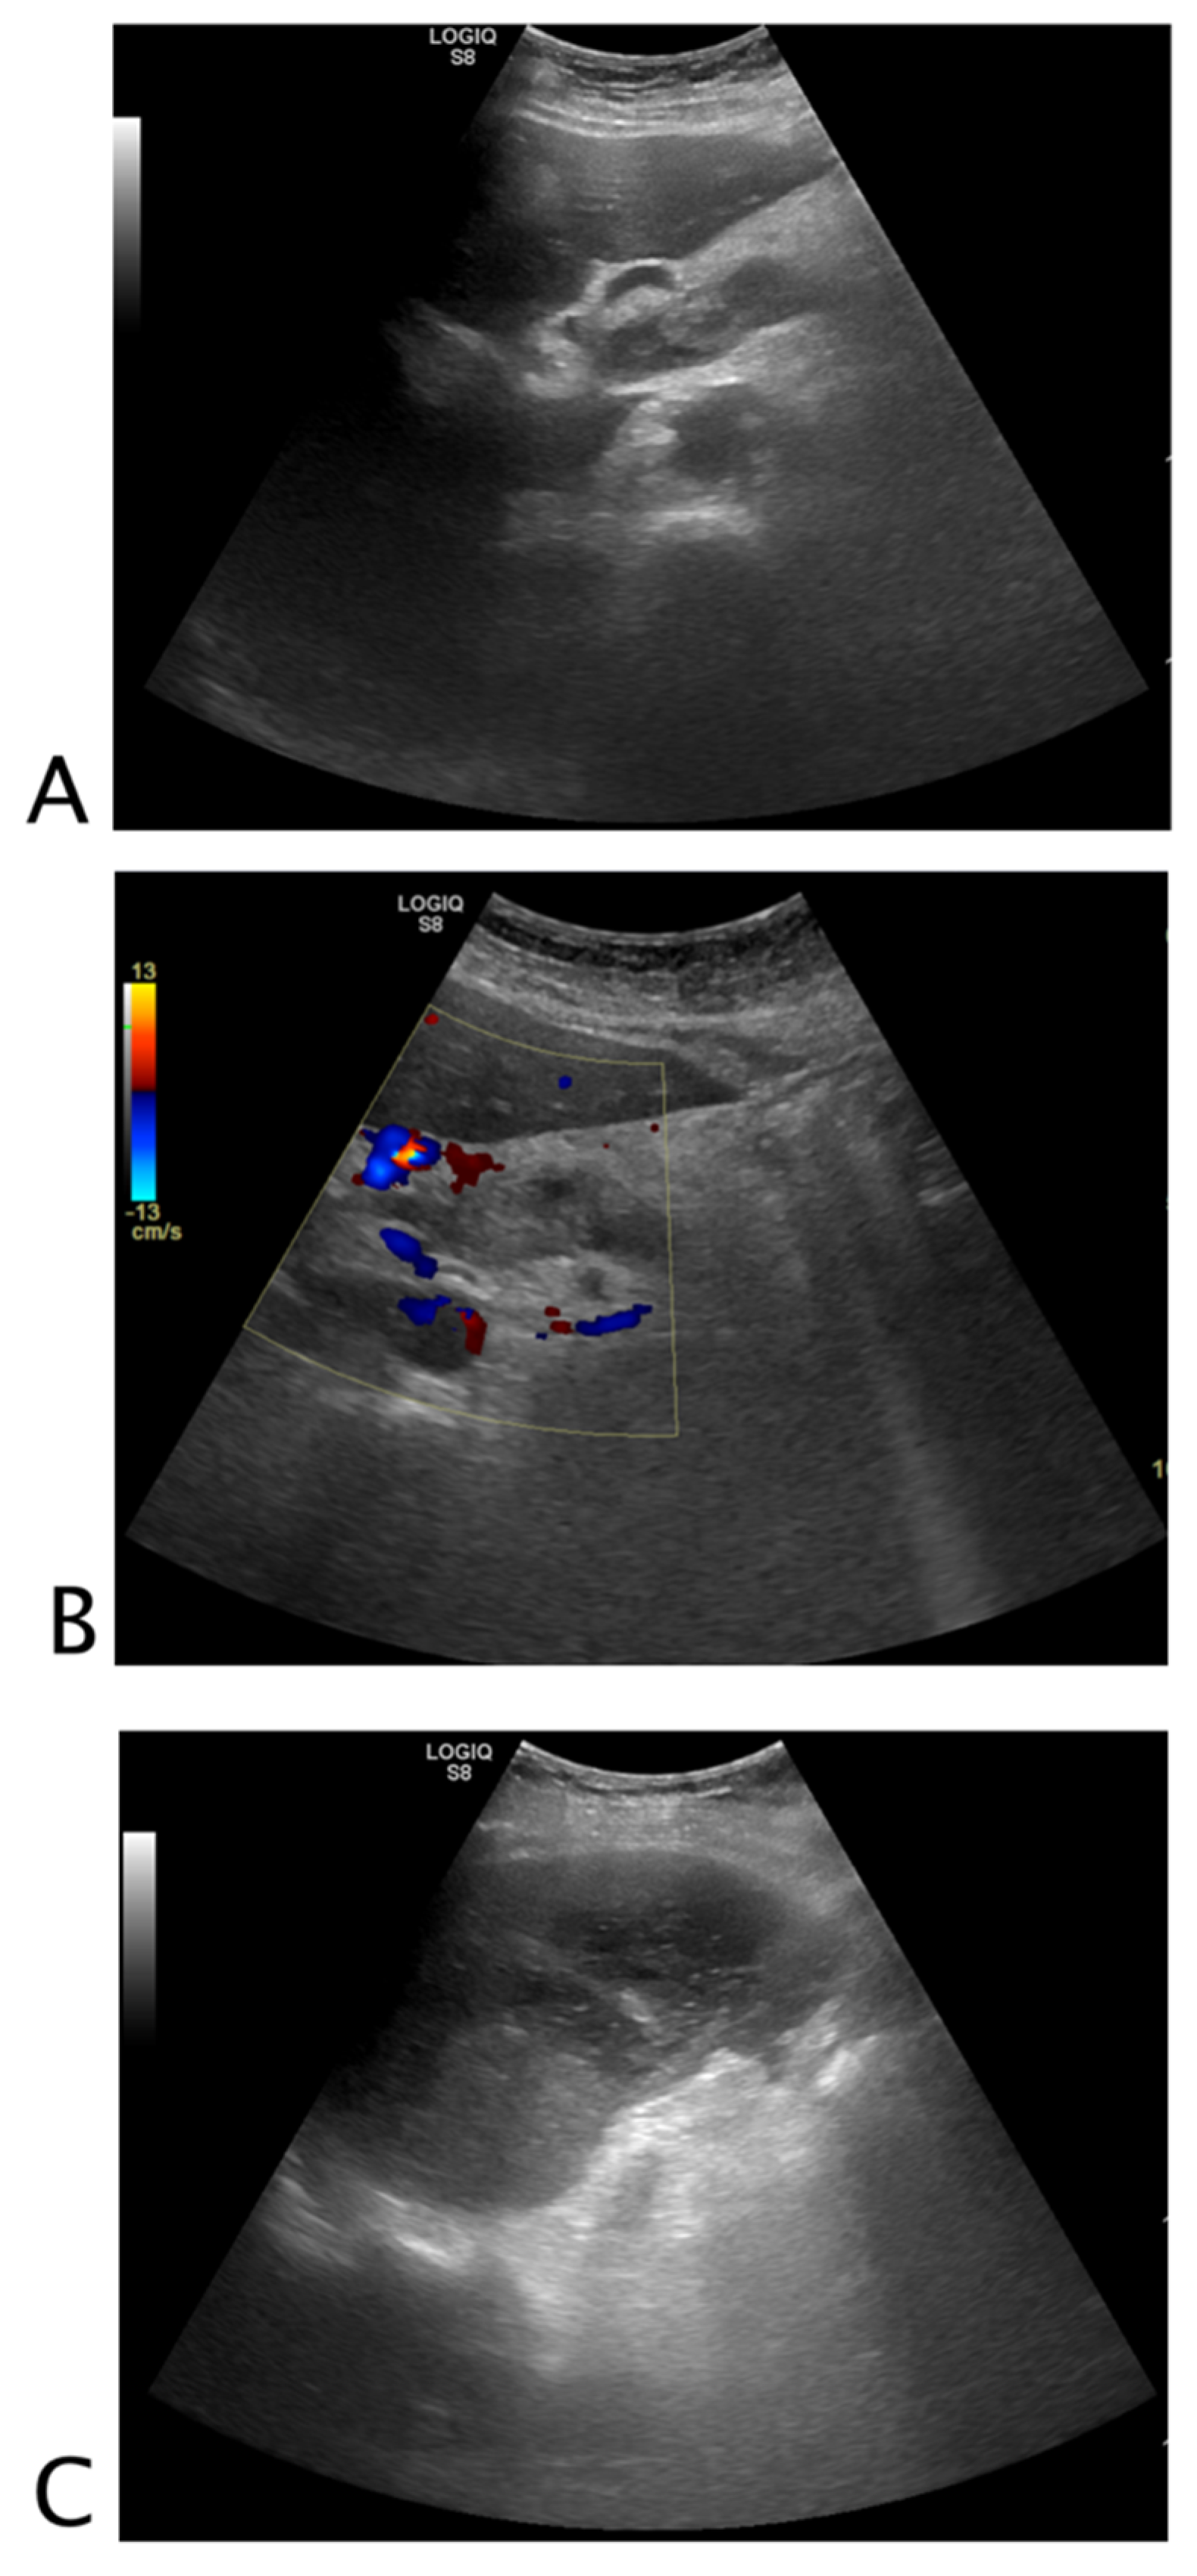 Tomography | Free Full-Text | The &ldquo;Black a Simplified Ultrasound Approach Non-Traumatic Abdominal